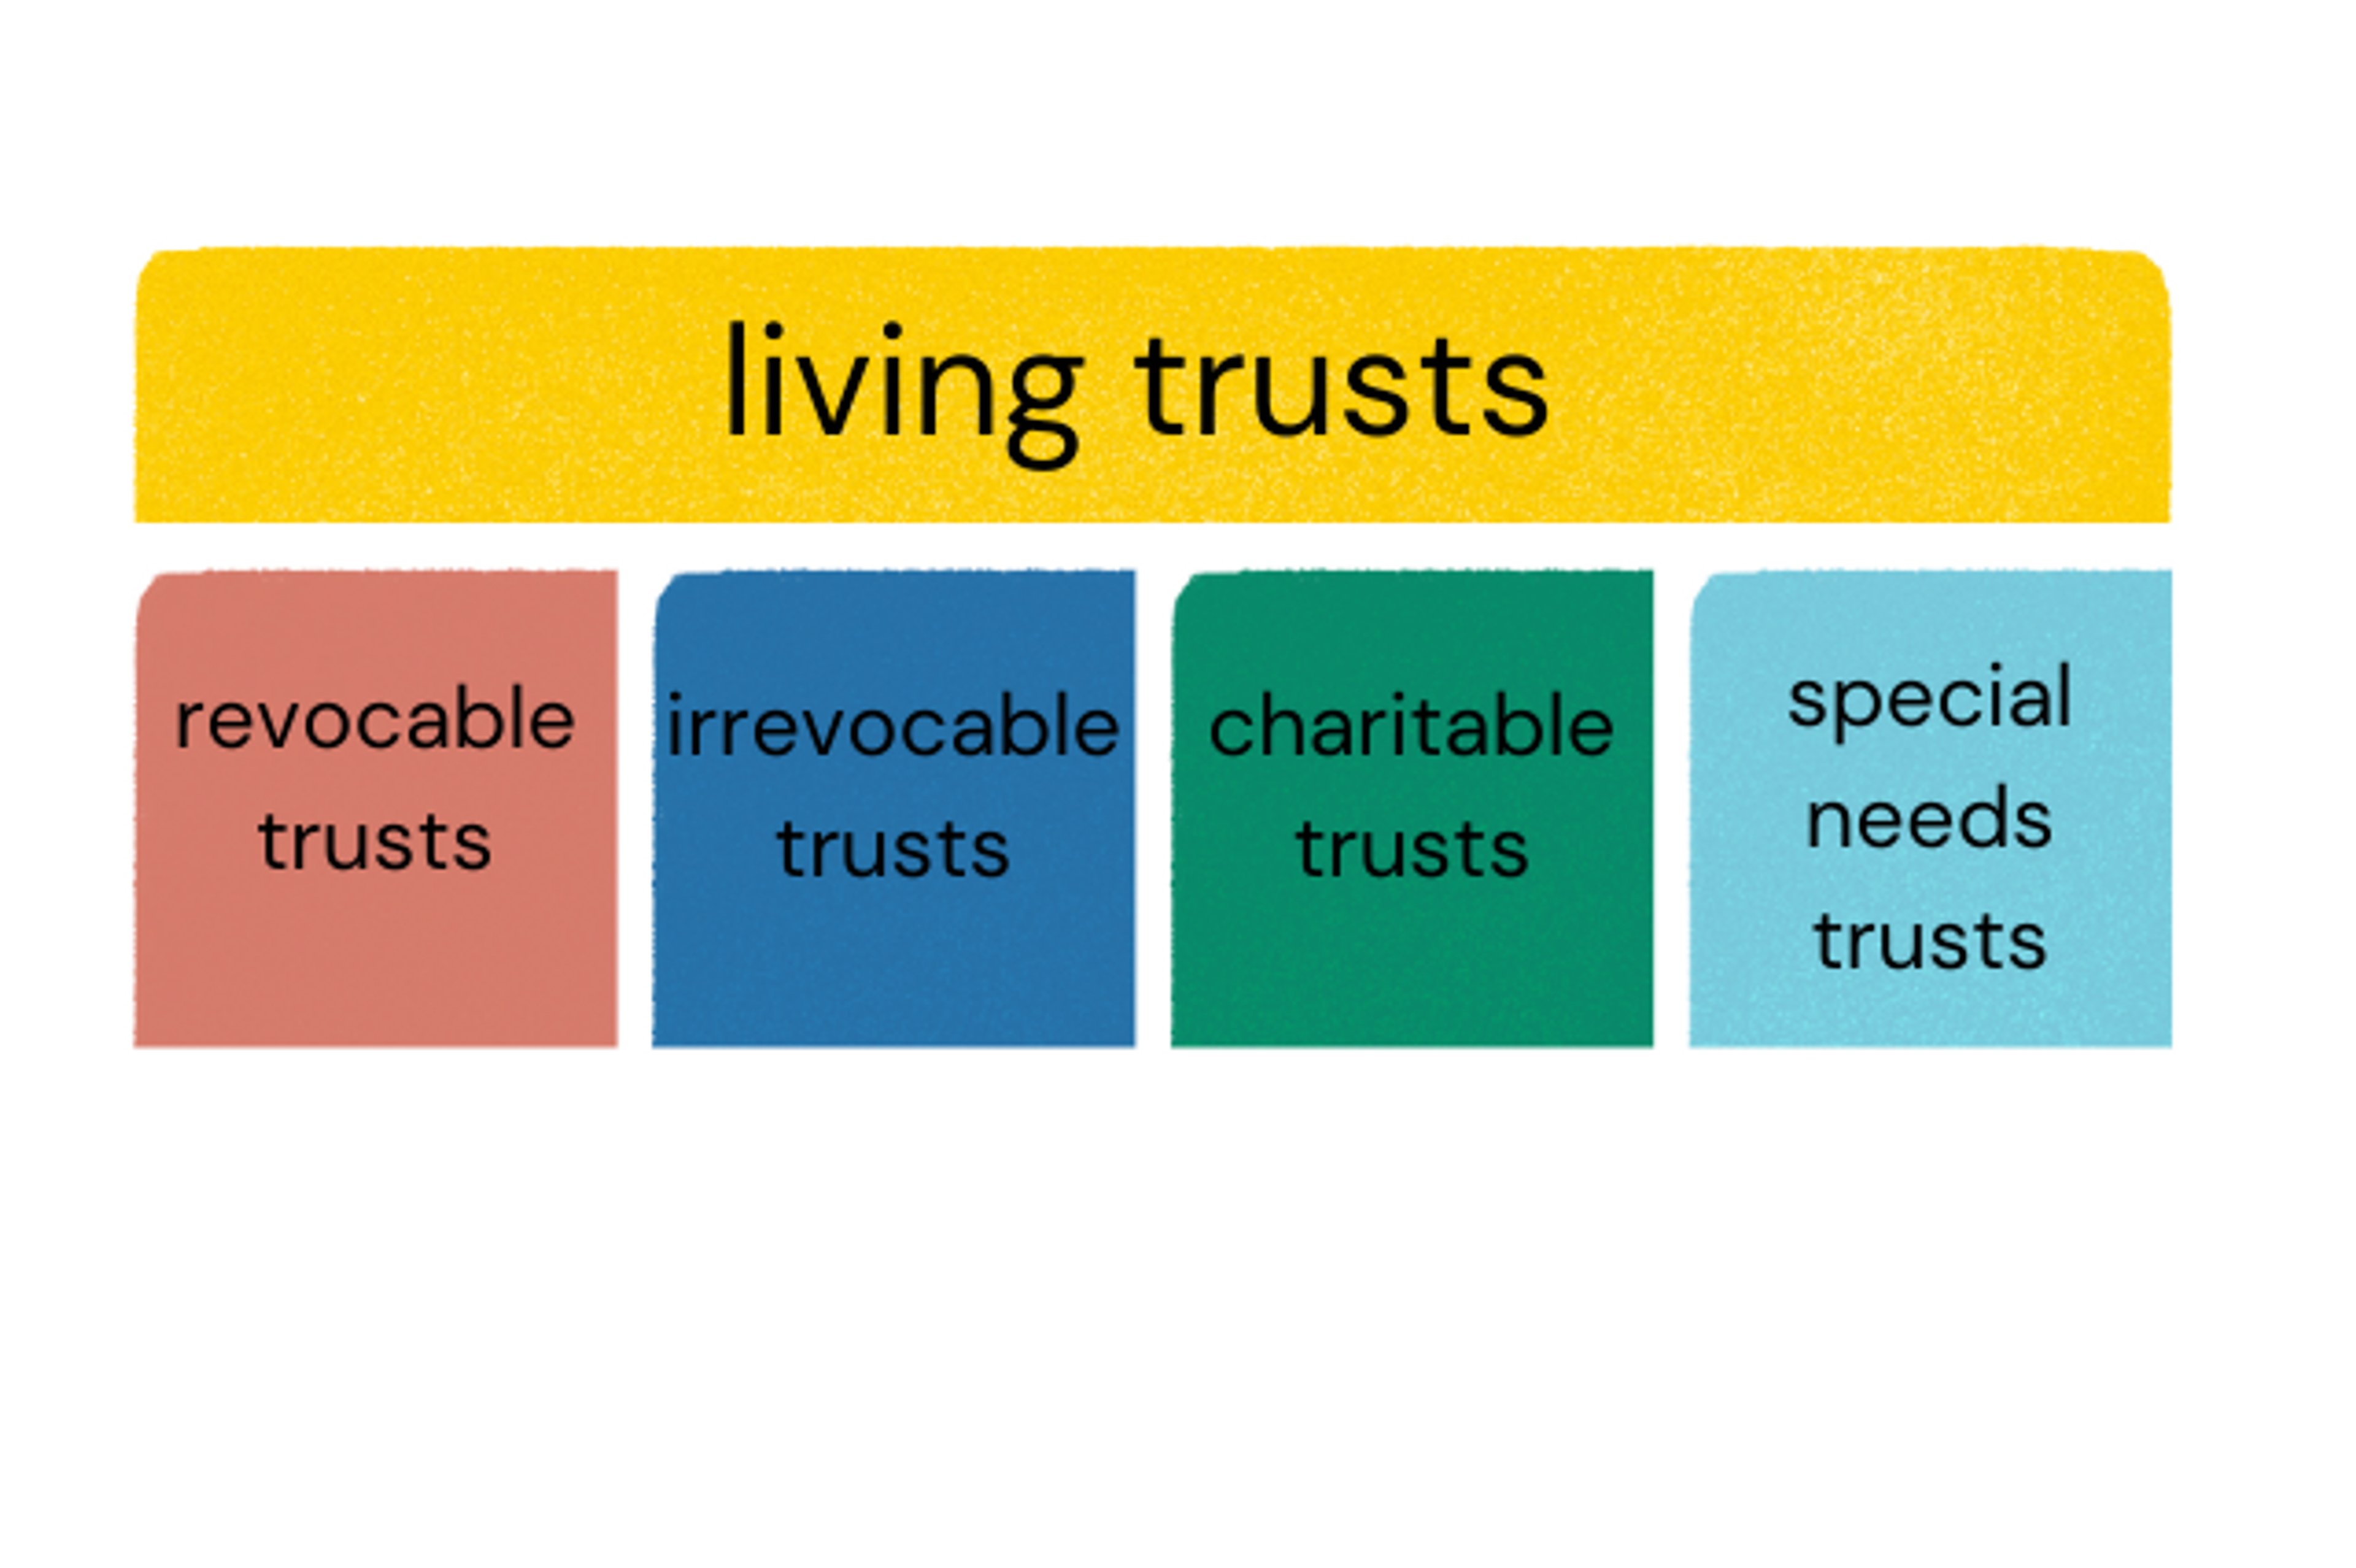 Diagram showing revocable trusts as a subset of living trusts